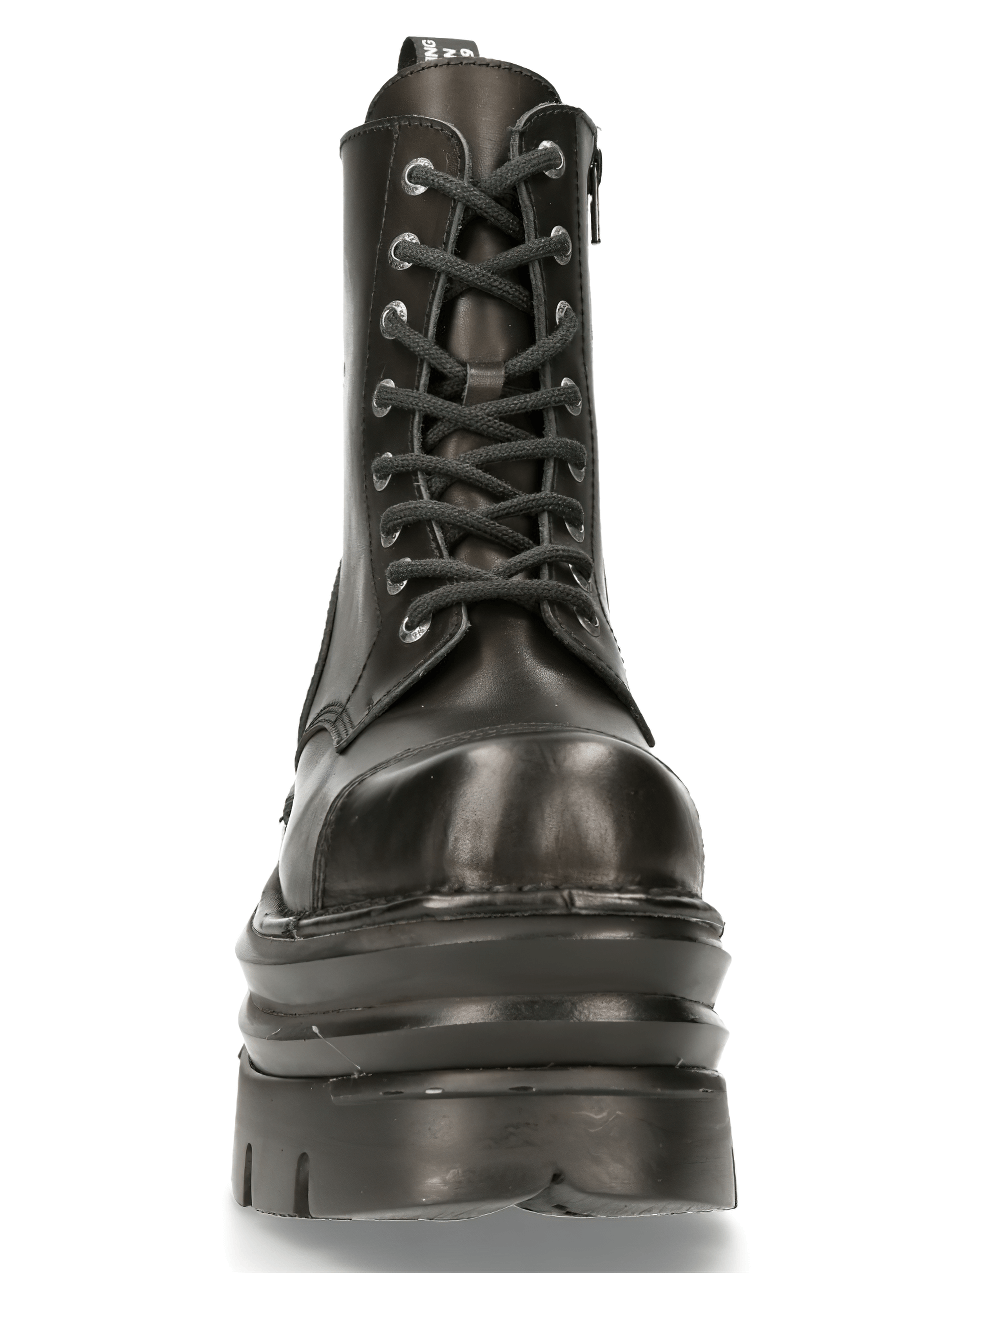 NEW ROCK Sturdy Black Military-Style Leather Boots